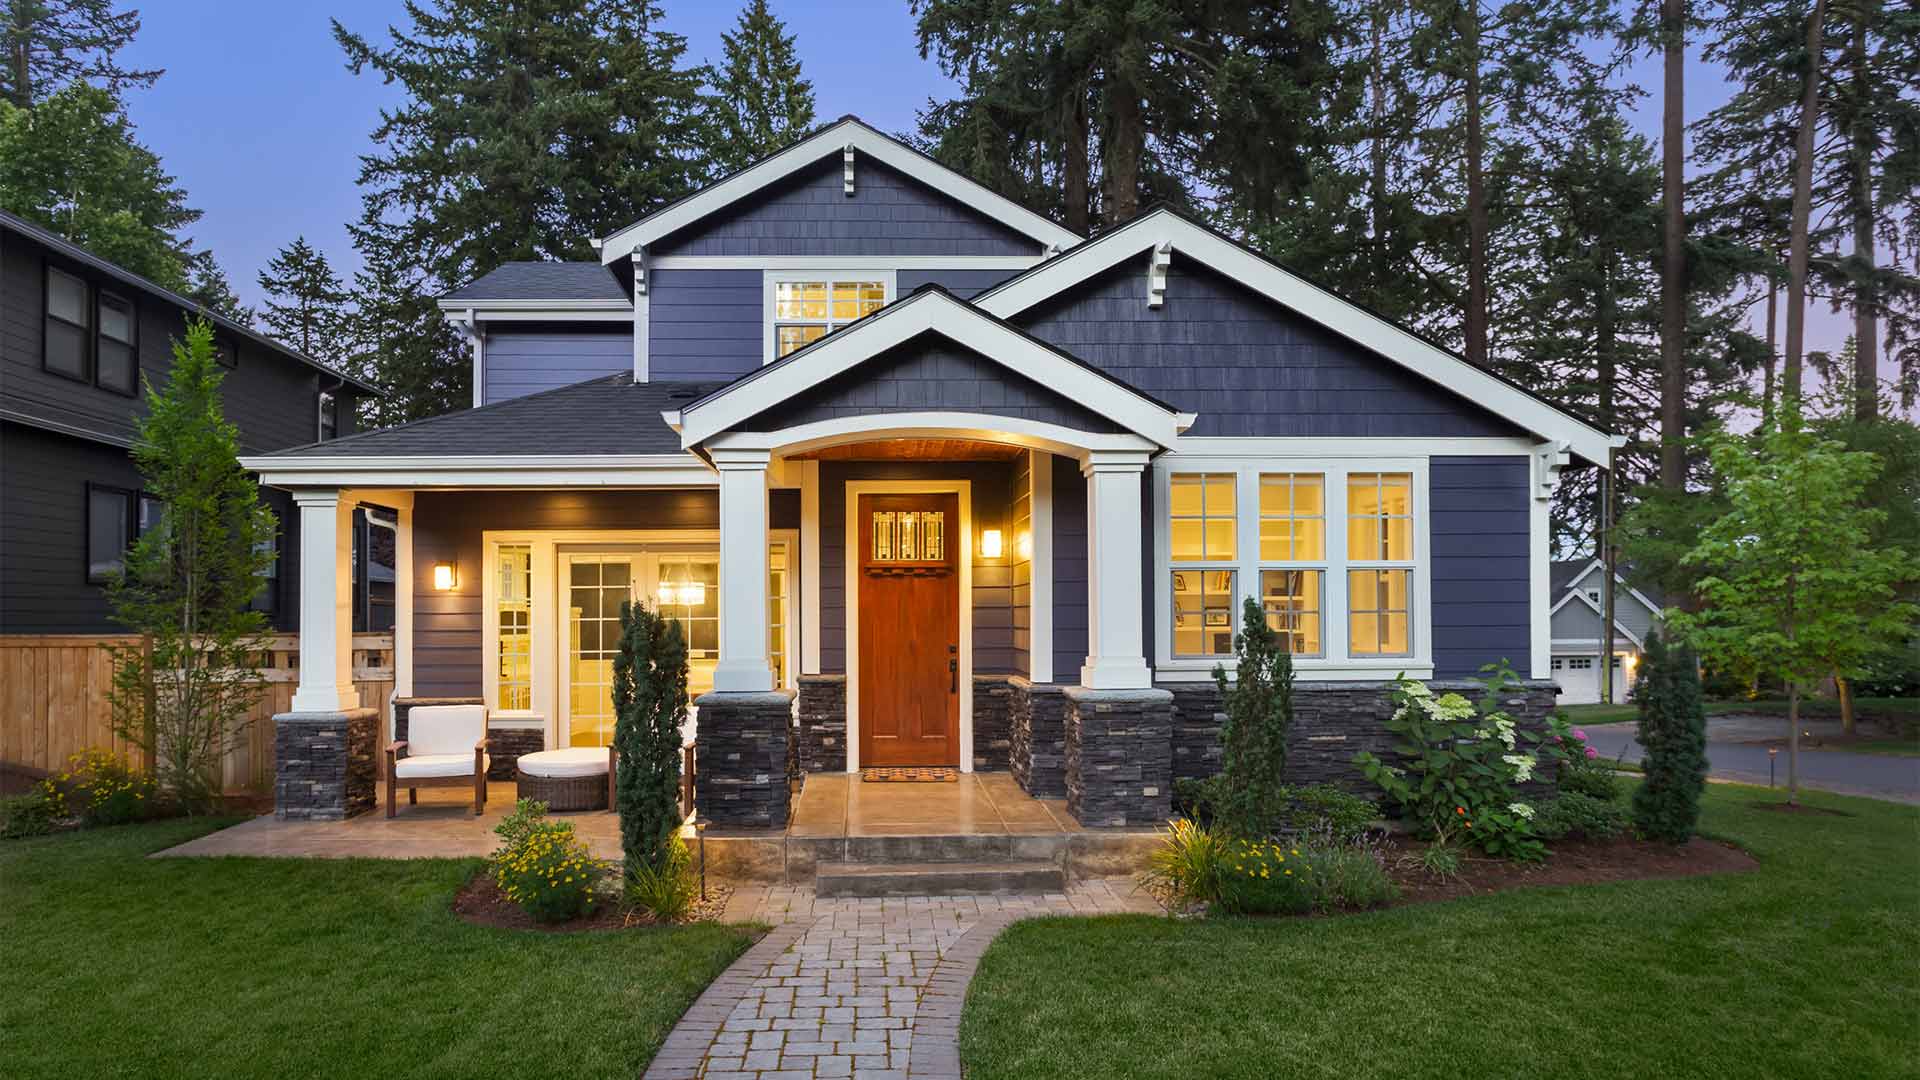 6-DIY-Curb-Appeal-Ideas-to-Sell-Your-Home-Fast